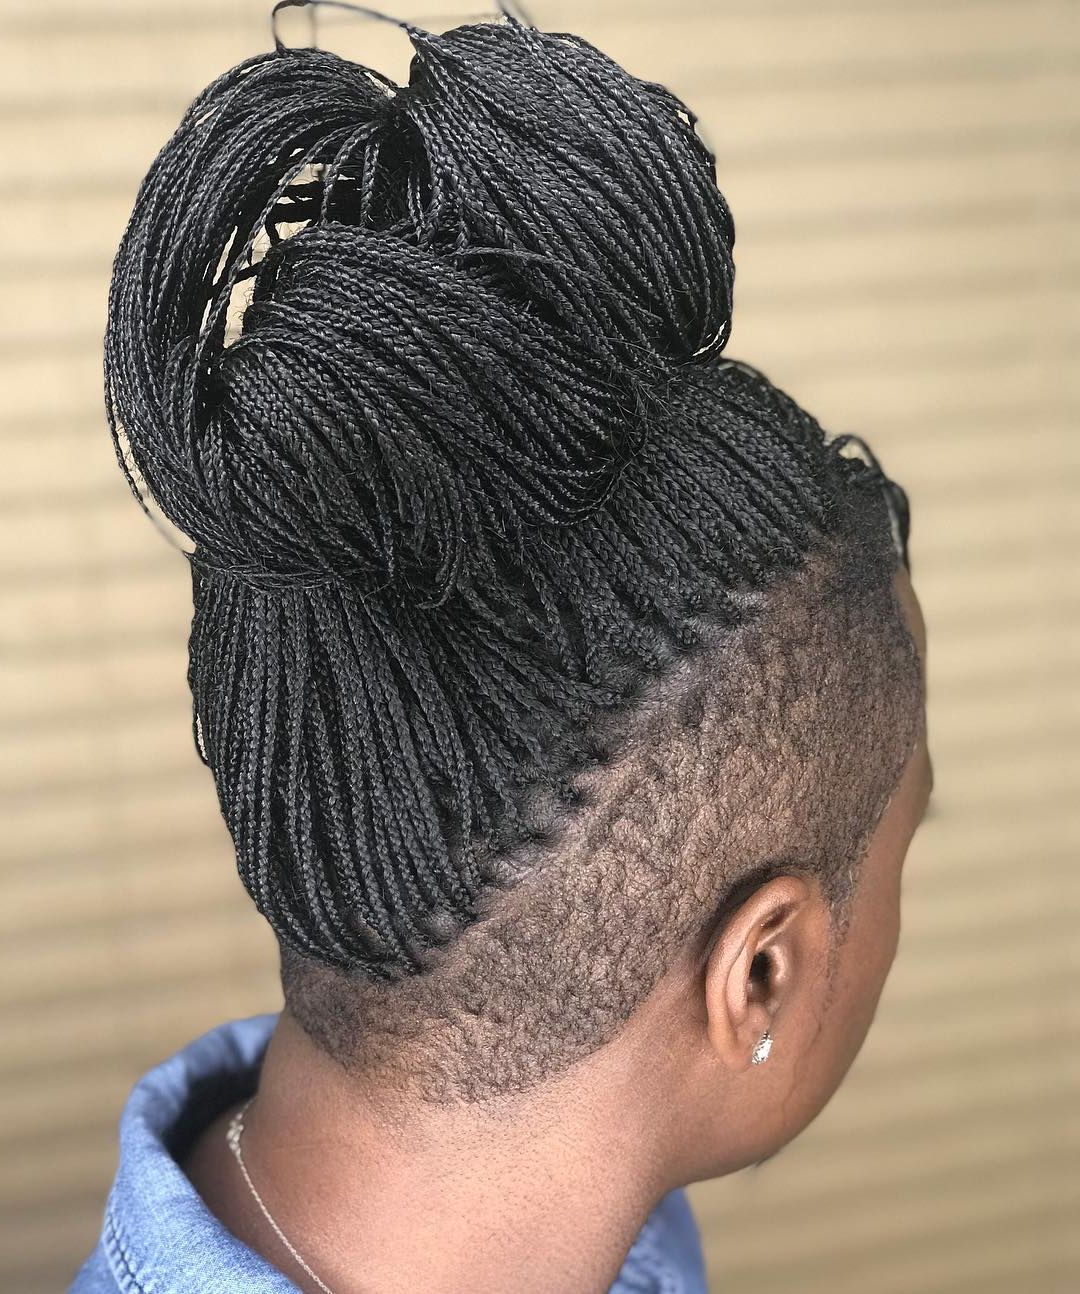 20 Superb Braids With Shaved Sides Worth Copying Intended For Most Up To Date Cornrow Ombre Ponytail Micro Braid Hairstyles (Gallery 20 of 20)